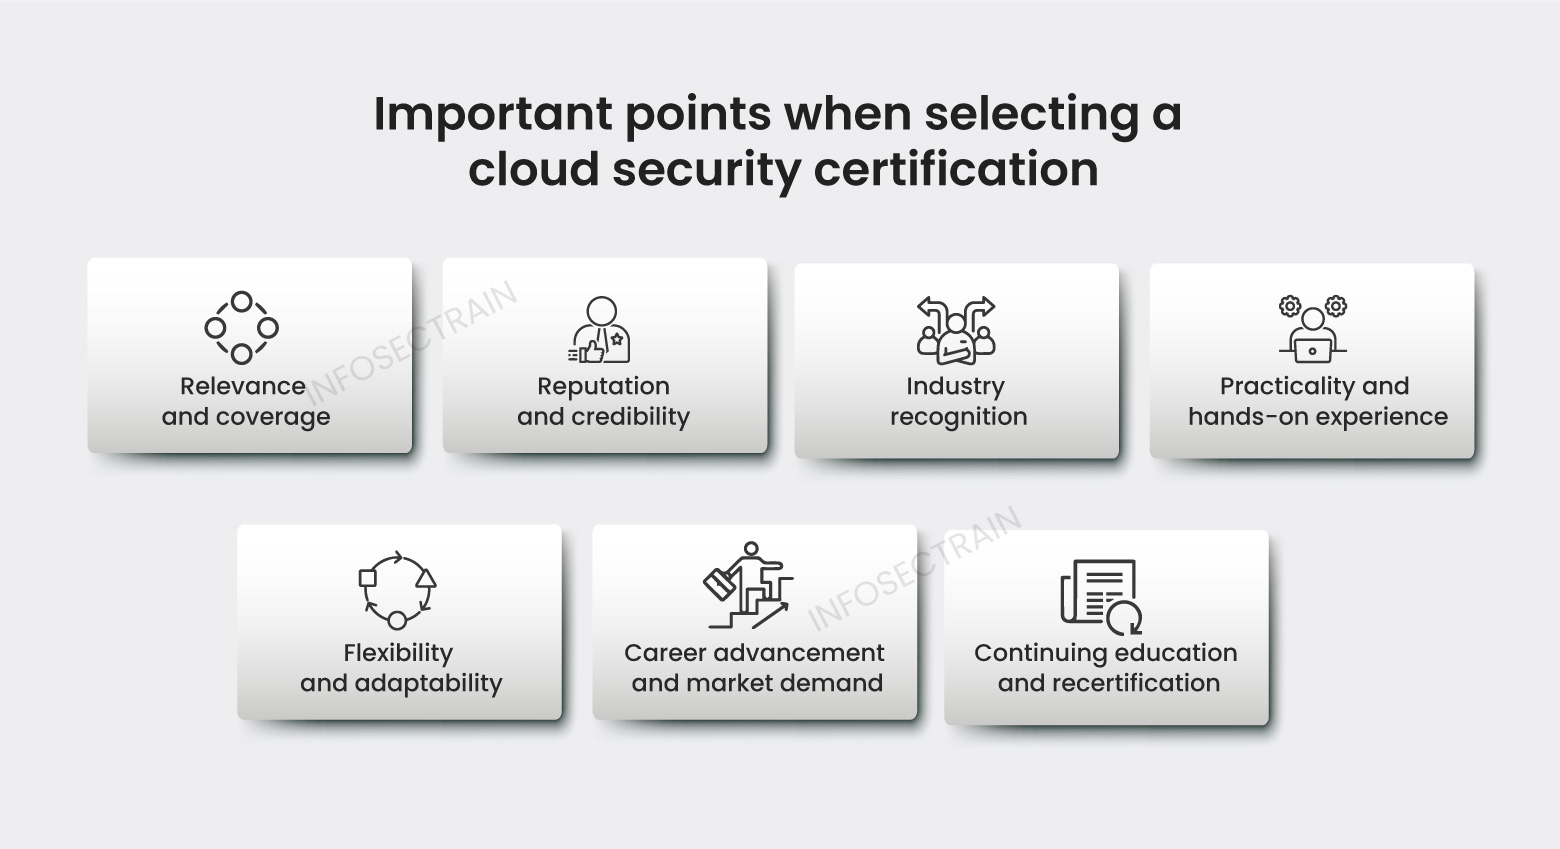 Consider a cloud security certification 